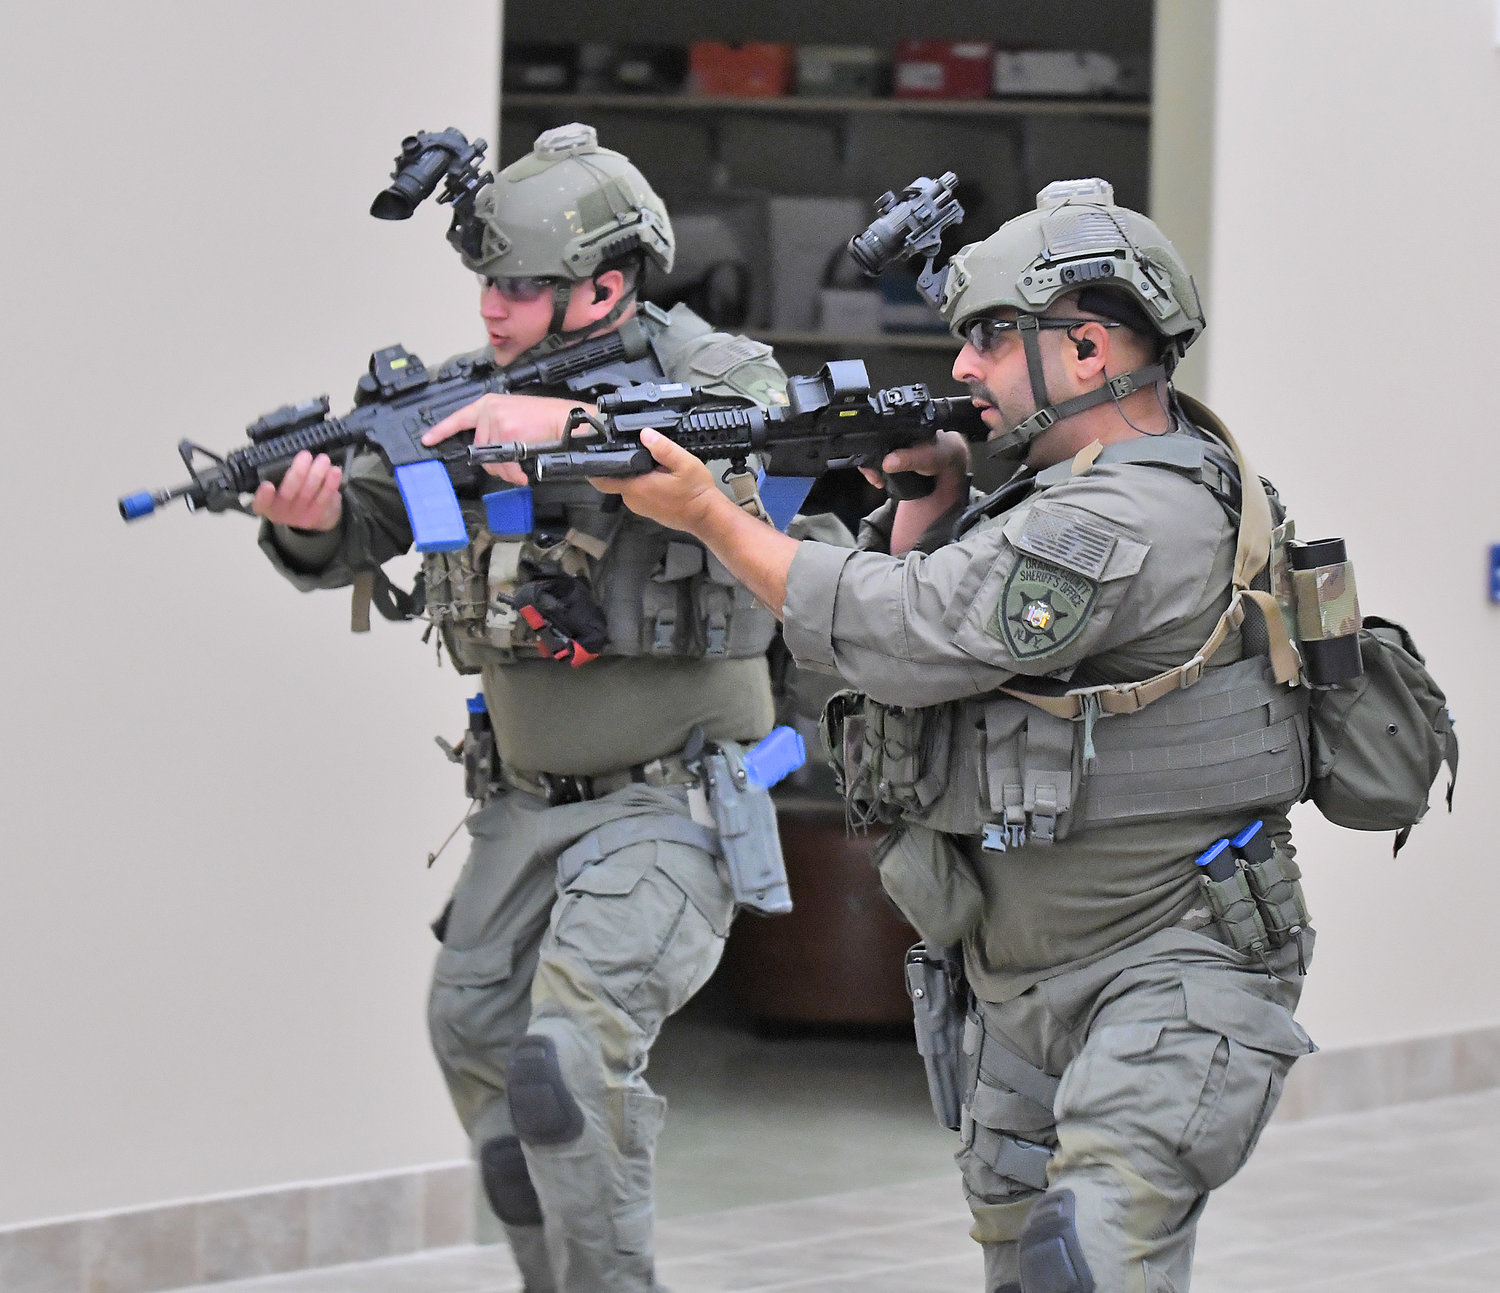 SWAT team members from the Orange County Sheriff's Office proceed through a simulated mall setting to find an active shooter during a scenario at the New York State Preparedness Training Center in Whitestown.